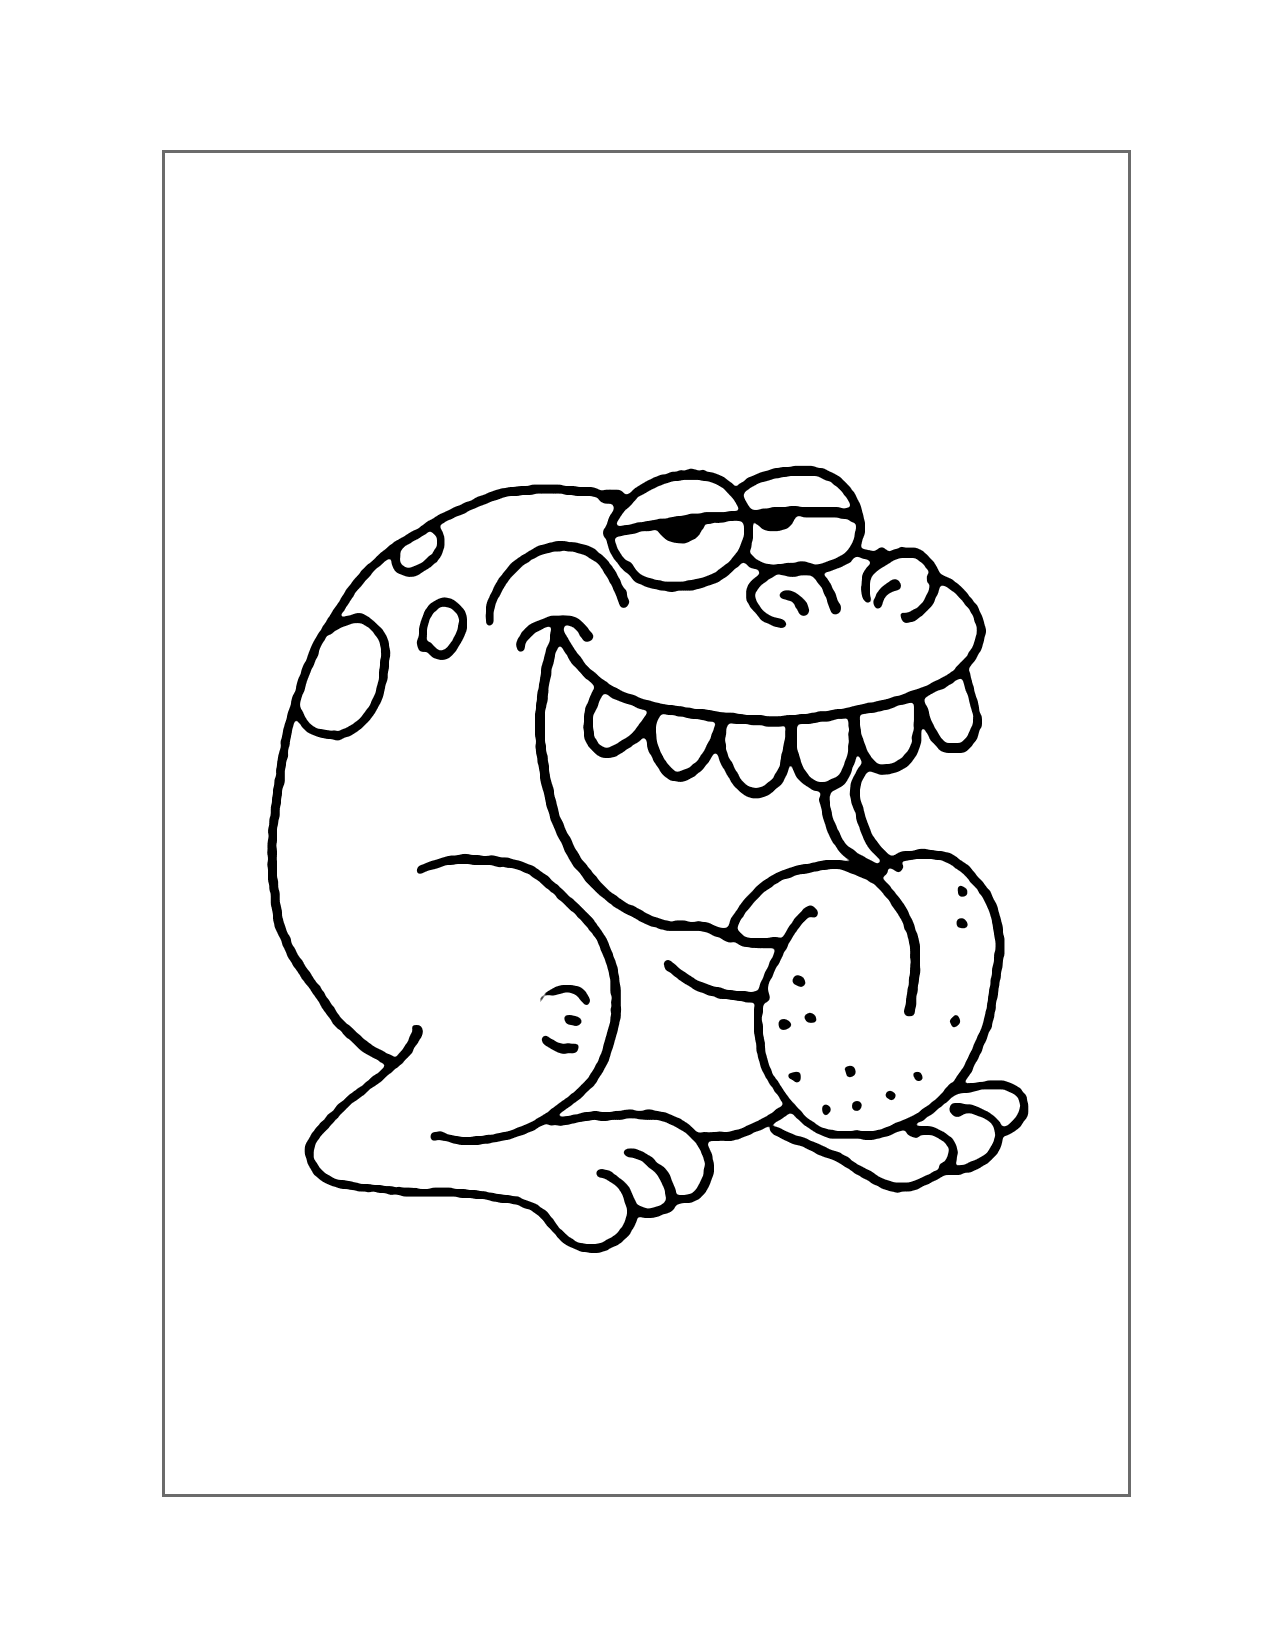 Funny Monster Coloring Page